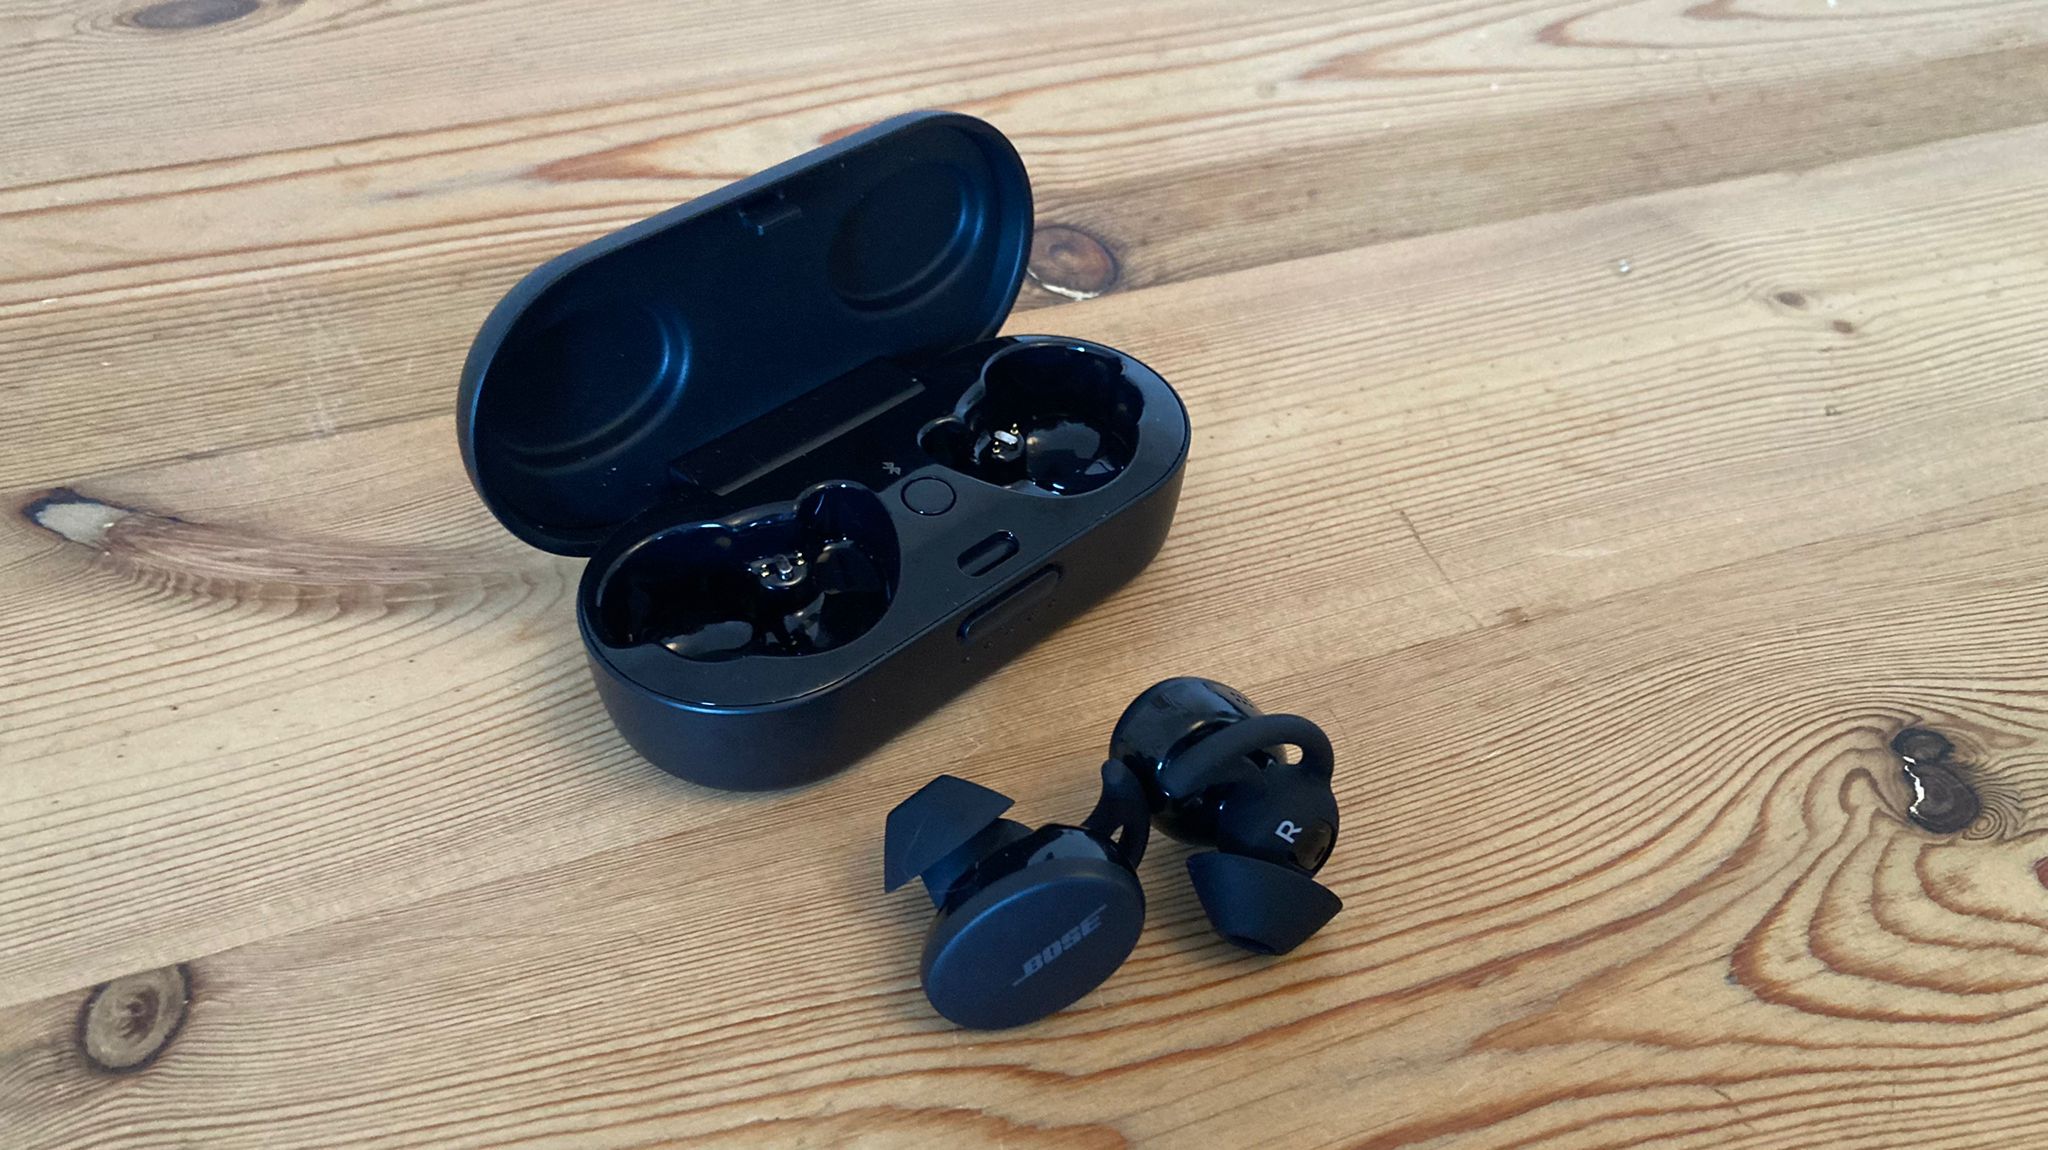 Bose Sport earbuds being tested by LiveScience